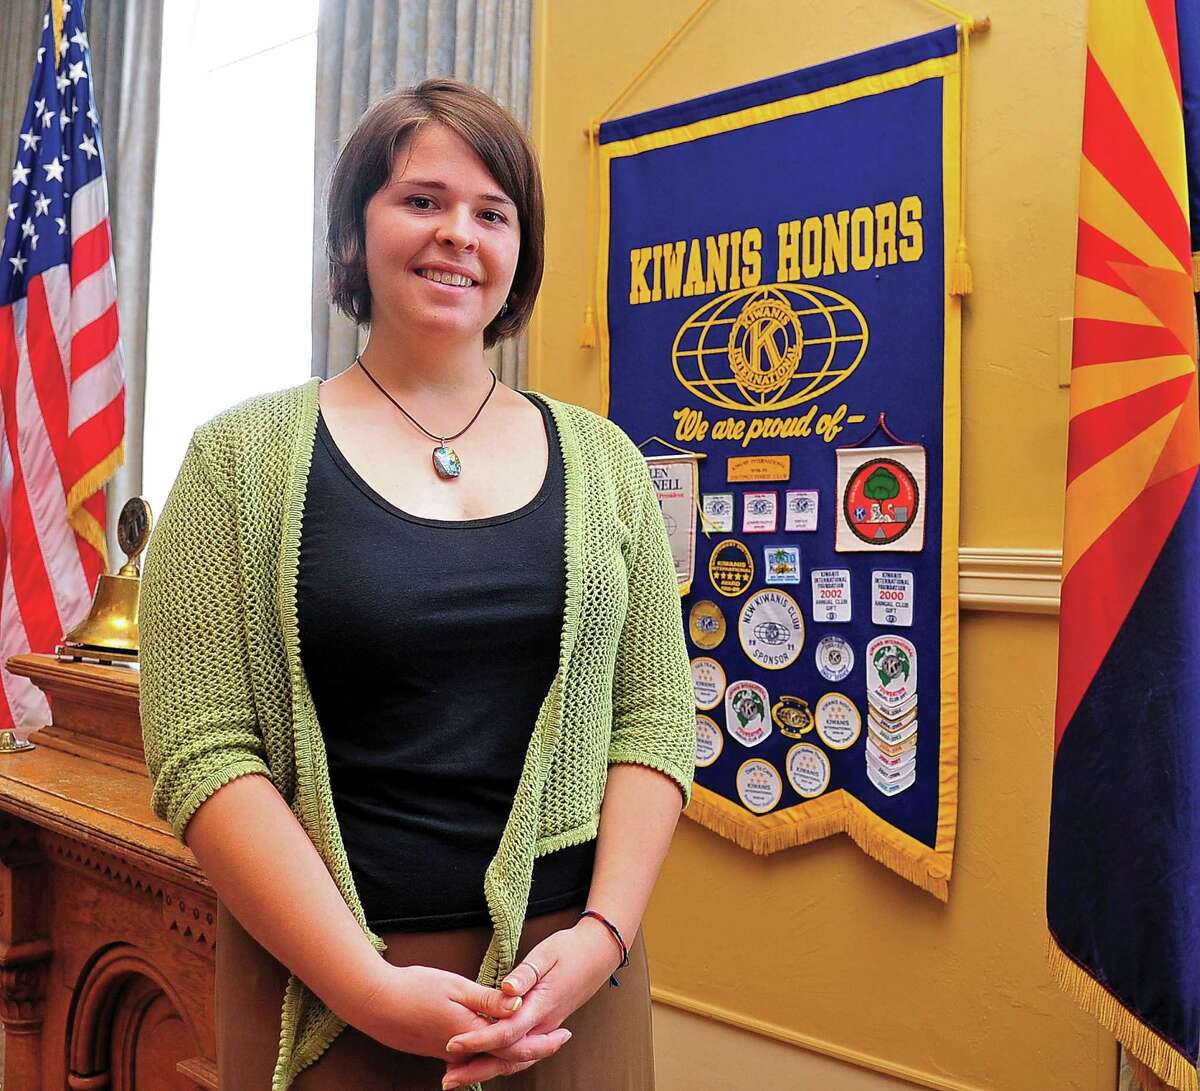 FILE -- In this May 30, 2013 file photo, Kayla Mueller is shown after speaking to a group in Prescott, Ariz. Omar Alkhani, boyfriend of Mueller, spoke to The Associated Press on Sunday, Feb. 15, 2015, via webcam from Turkey in one of his first interviews. Alkhani talked about how he met Mueller in 2010 and the last time he saw her in 2013 as a prisoner of the Islamic State group. The U.S. government and Muellerís family confirmed her death last week. (AP Photo/The Daily Courier, Matt Hinshaw, File) MANDATORY CREDIT